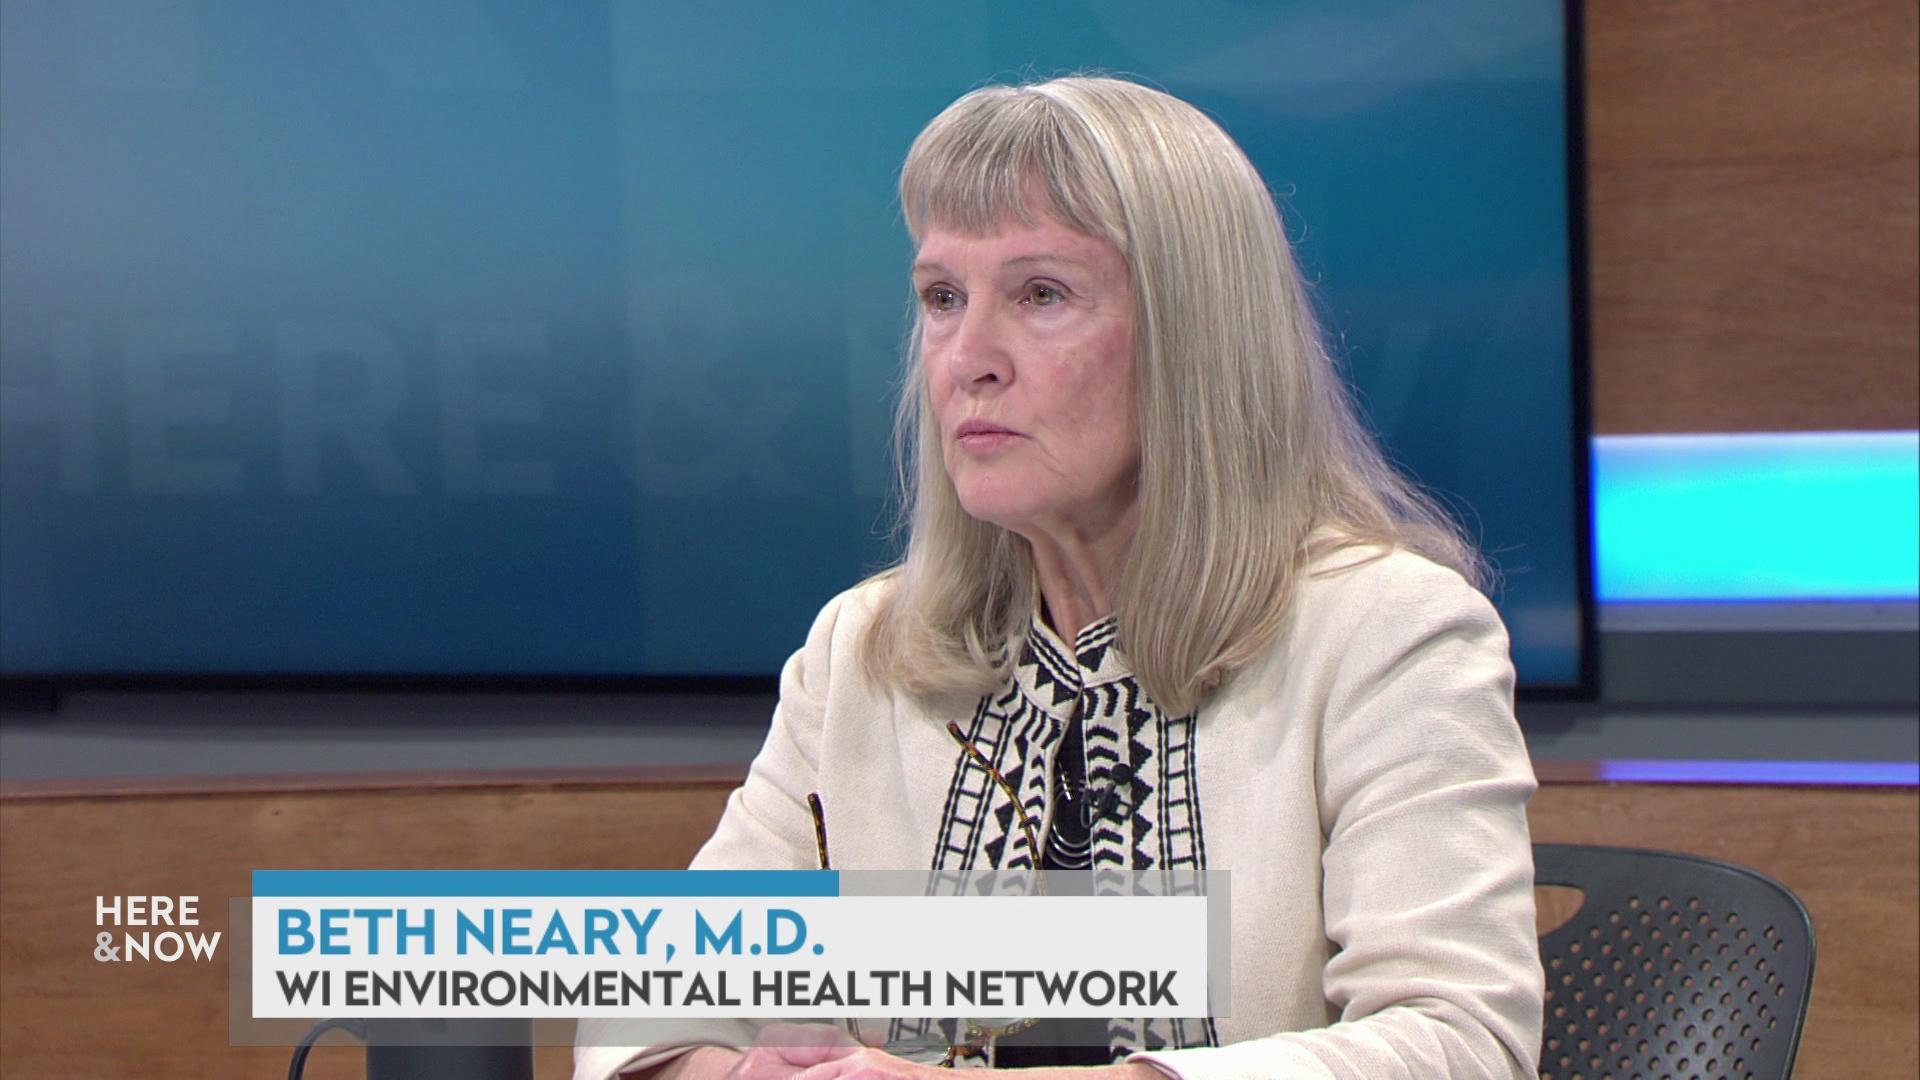 A still image shows Dr. Beth Neary seated at the 'Here & Now' set featuring wood paneling, with a graphic at bottom reading 'Beth Neary, M.D.' and 'Wi. Environmental Health Network.'